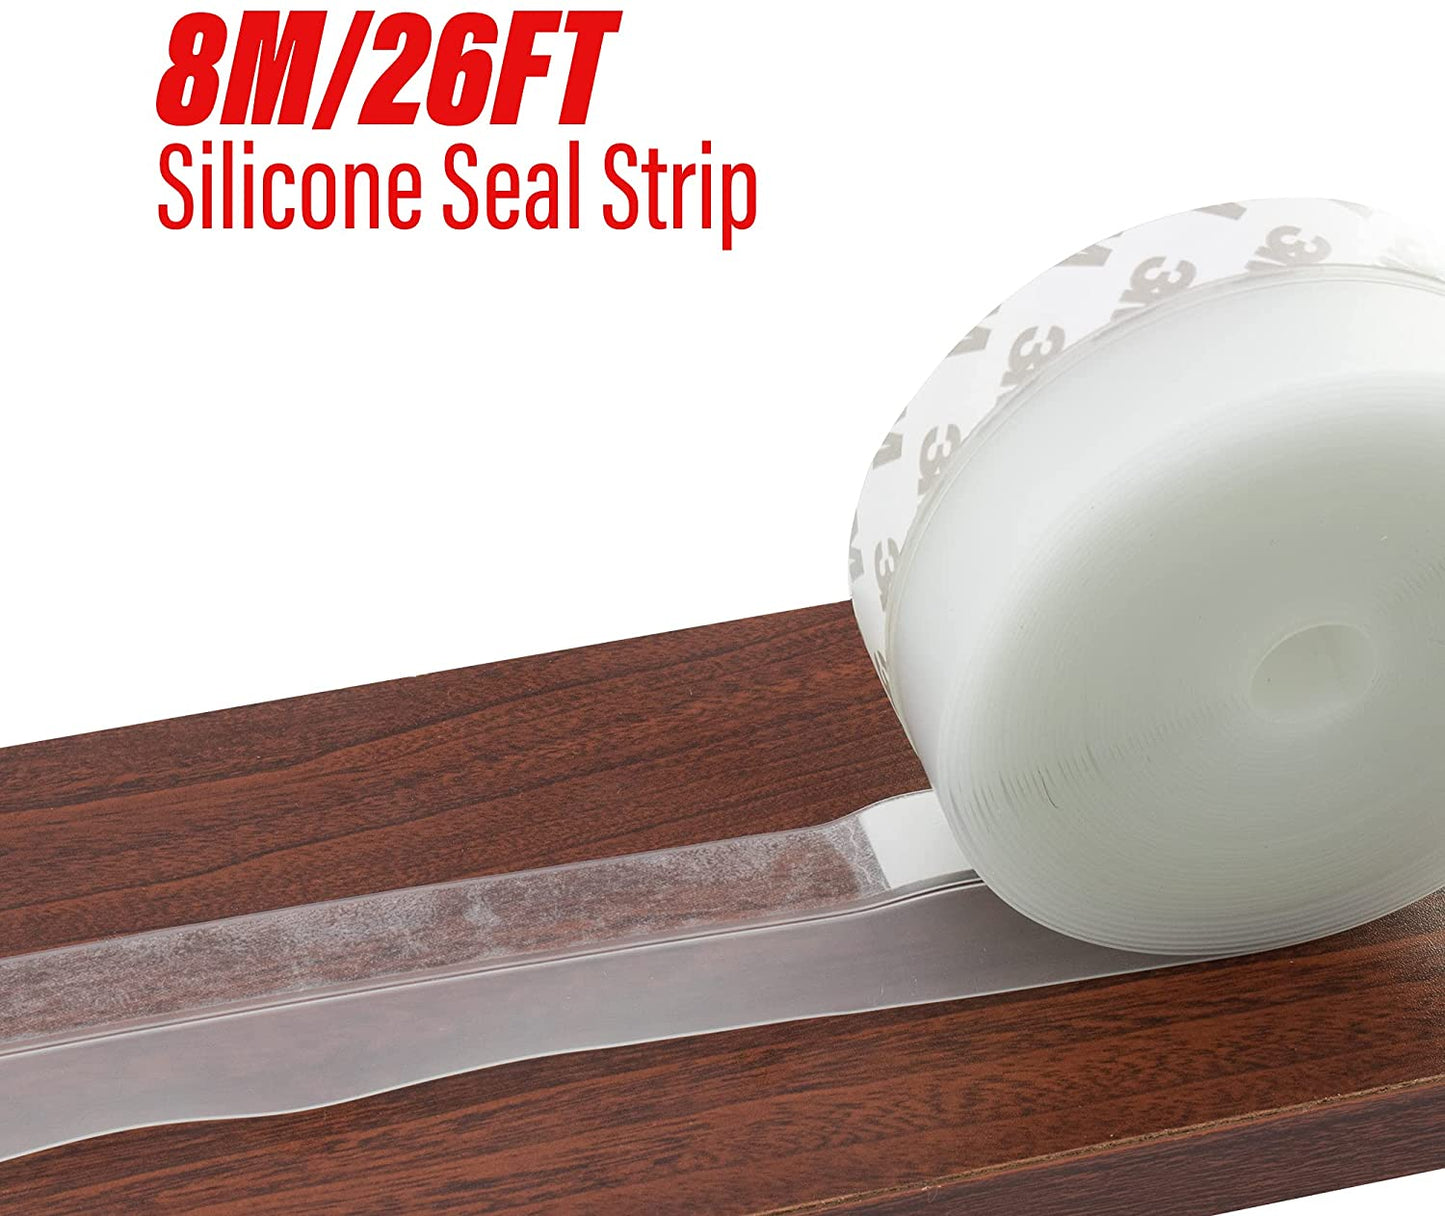 Silicone Seal Strip (26ft)